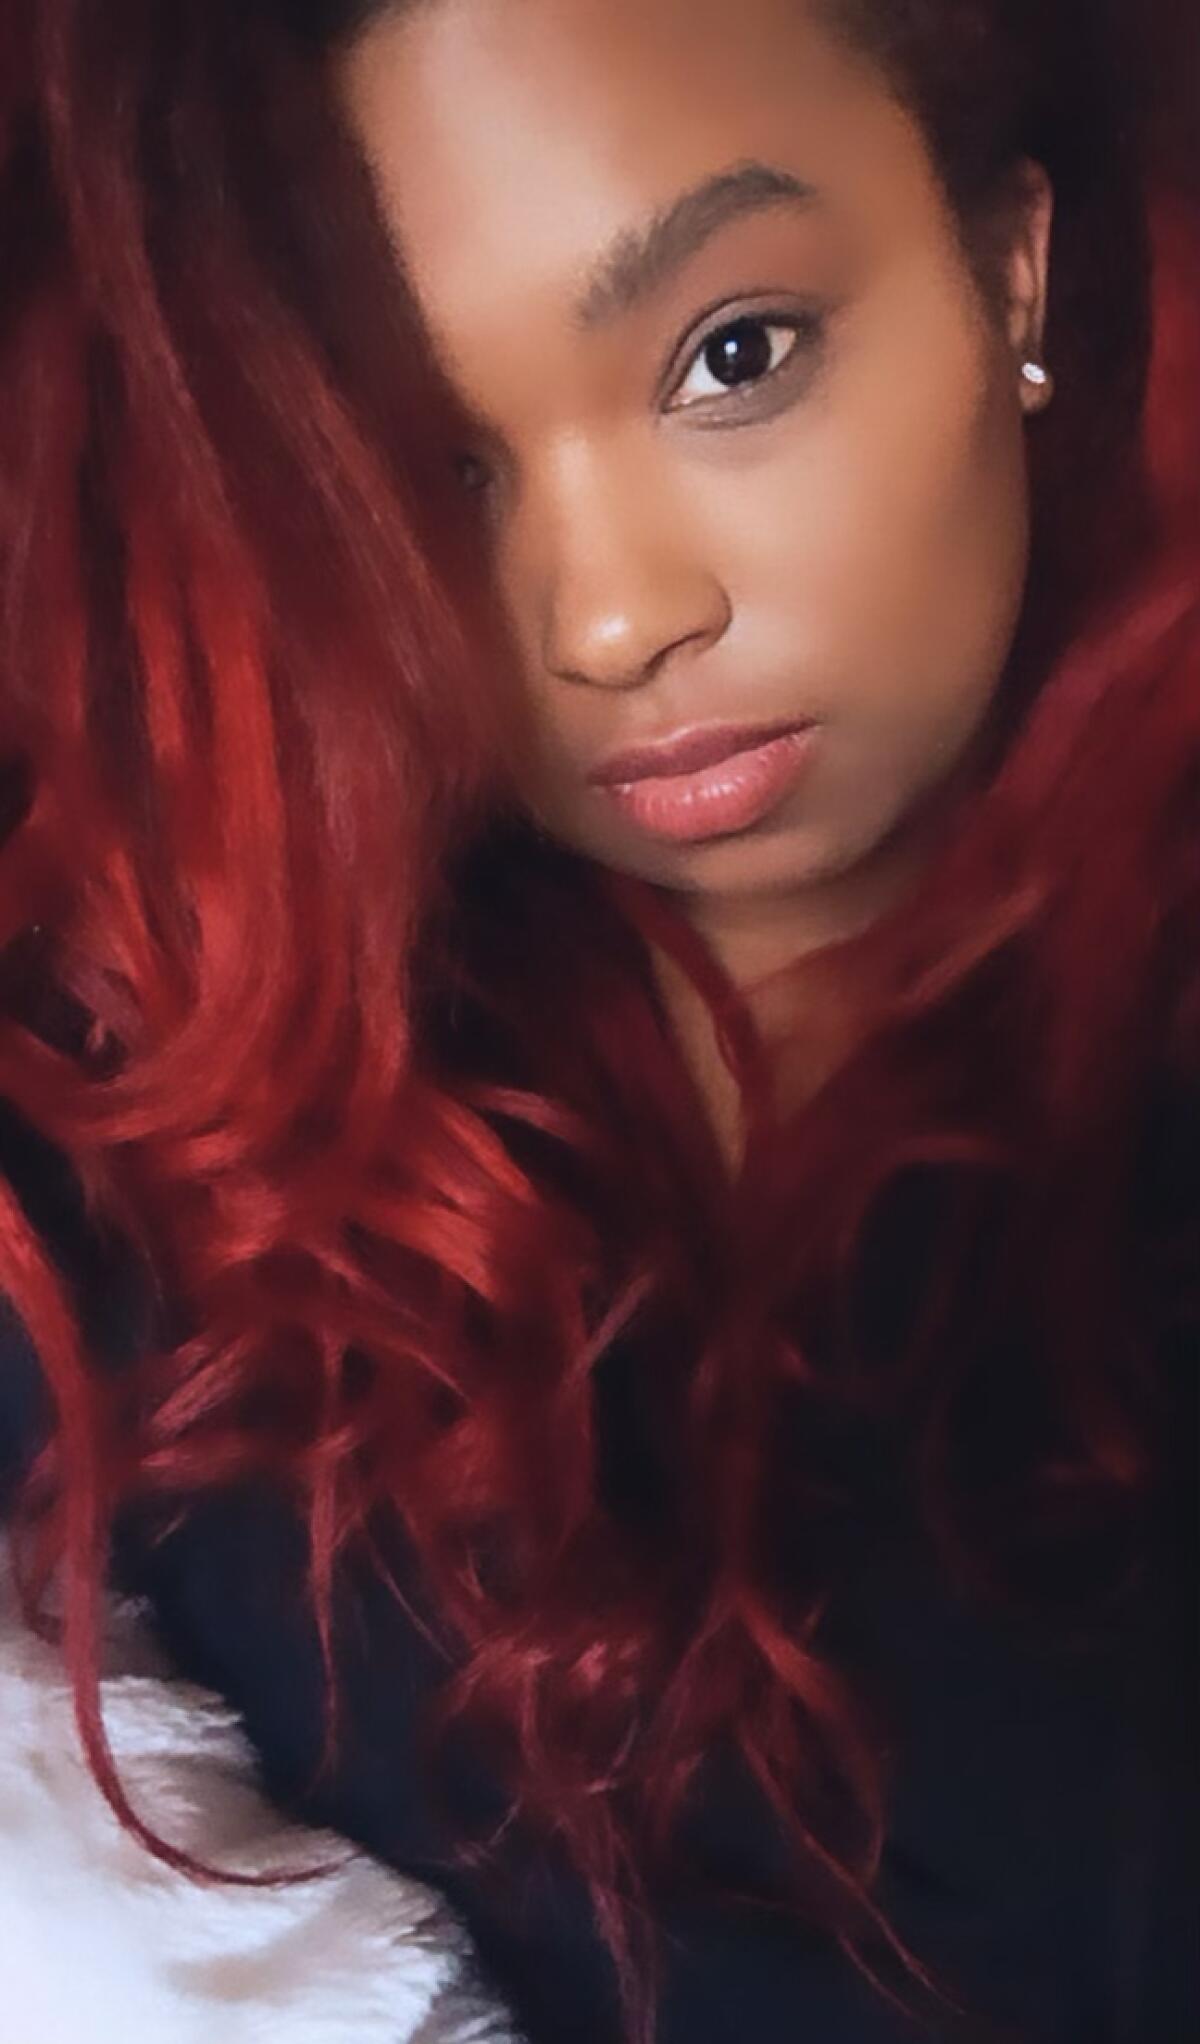 A woman's face and red hair.